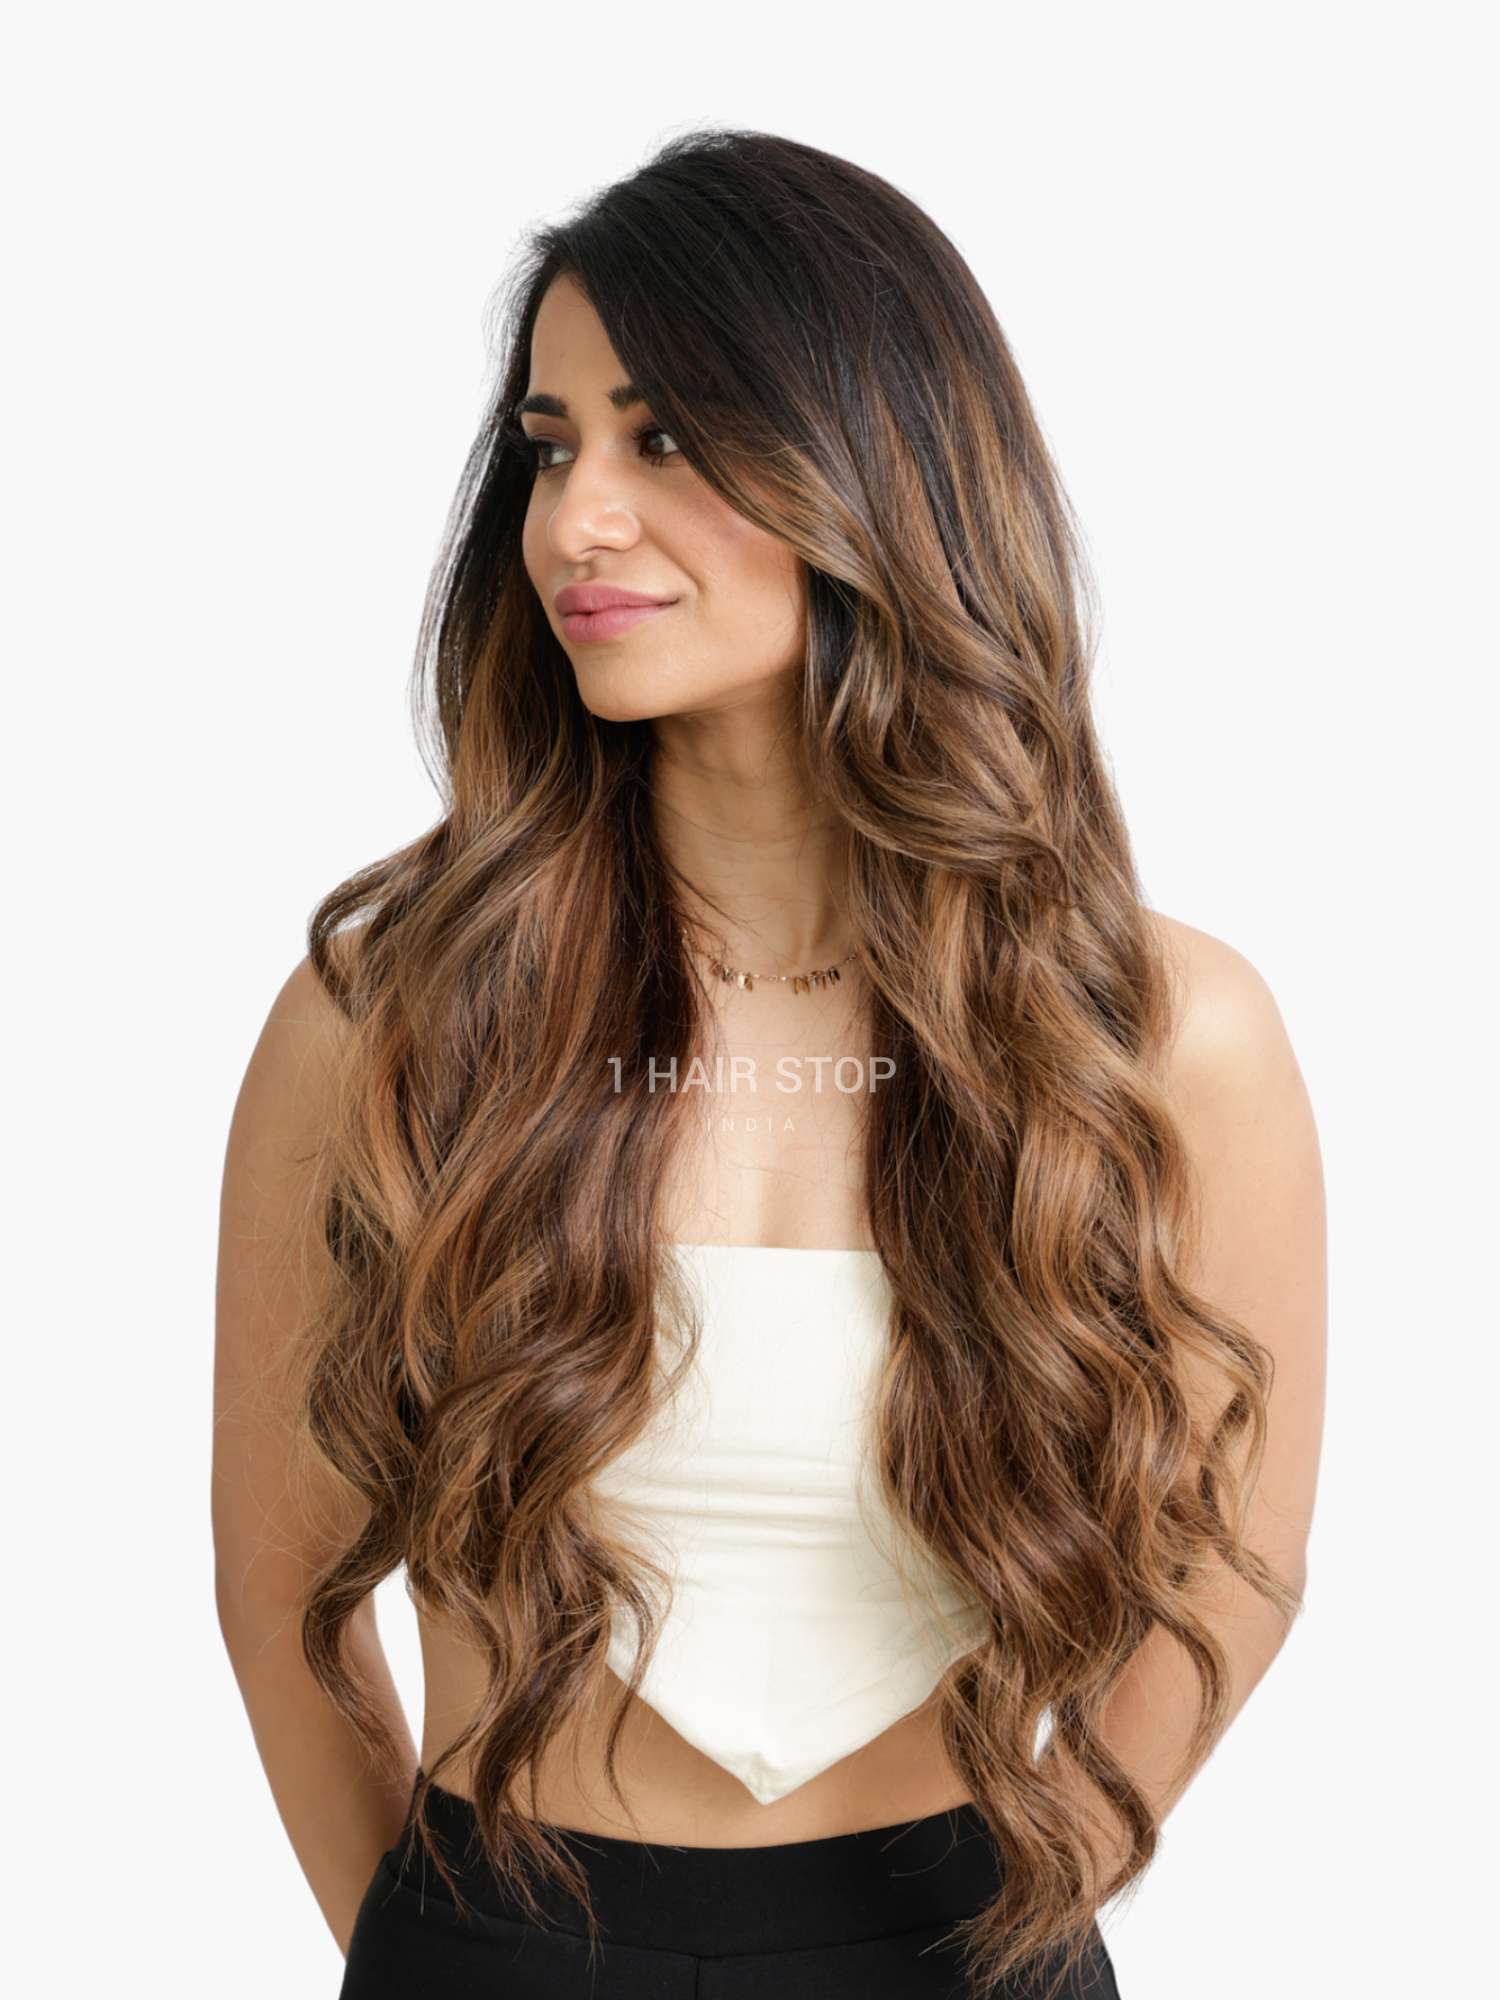 Hair Extensions For Women  Clip in Hair Extensions in India  1 Hair Stop  India